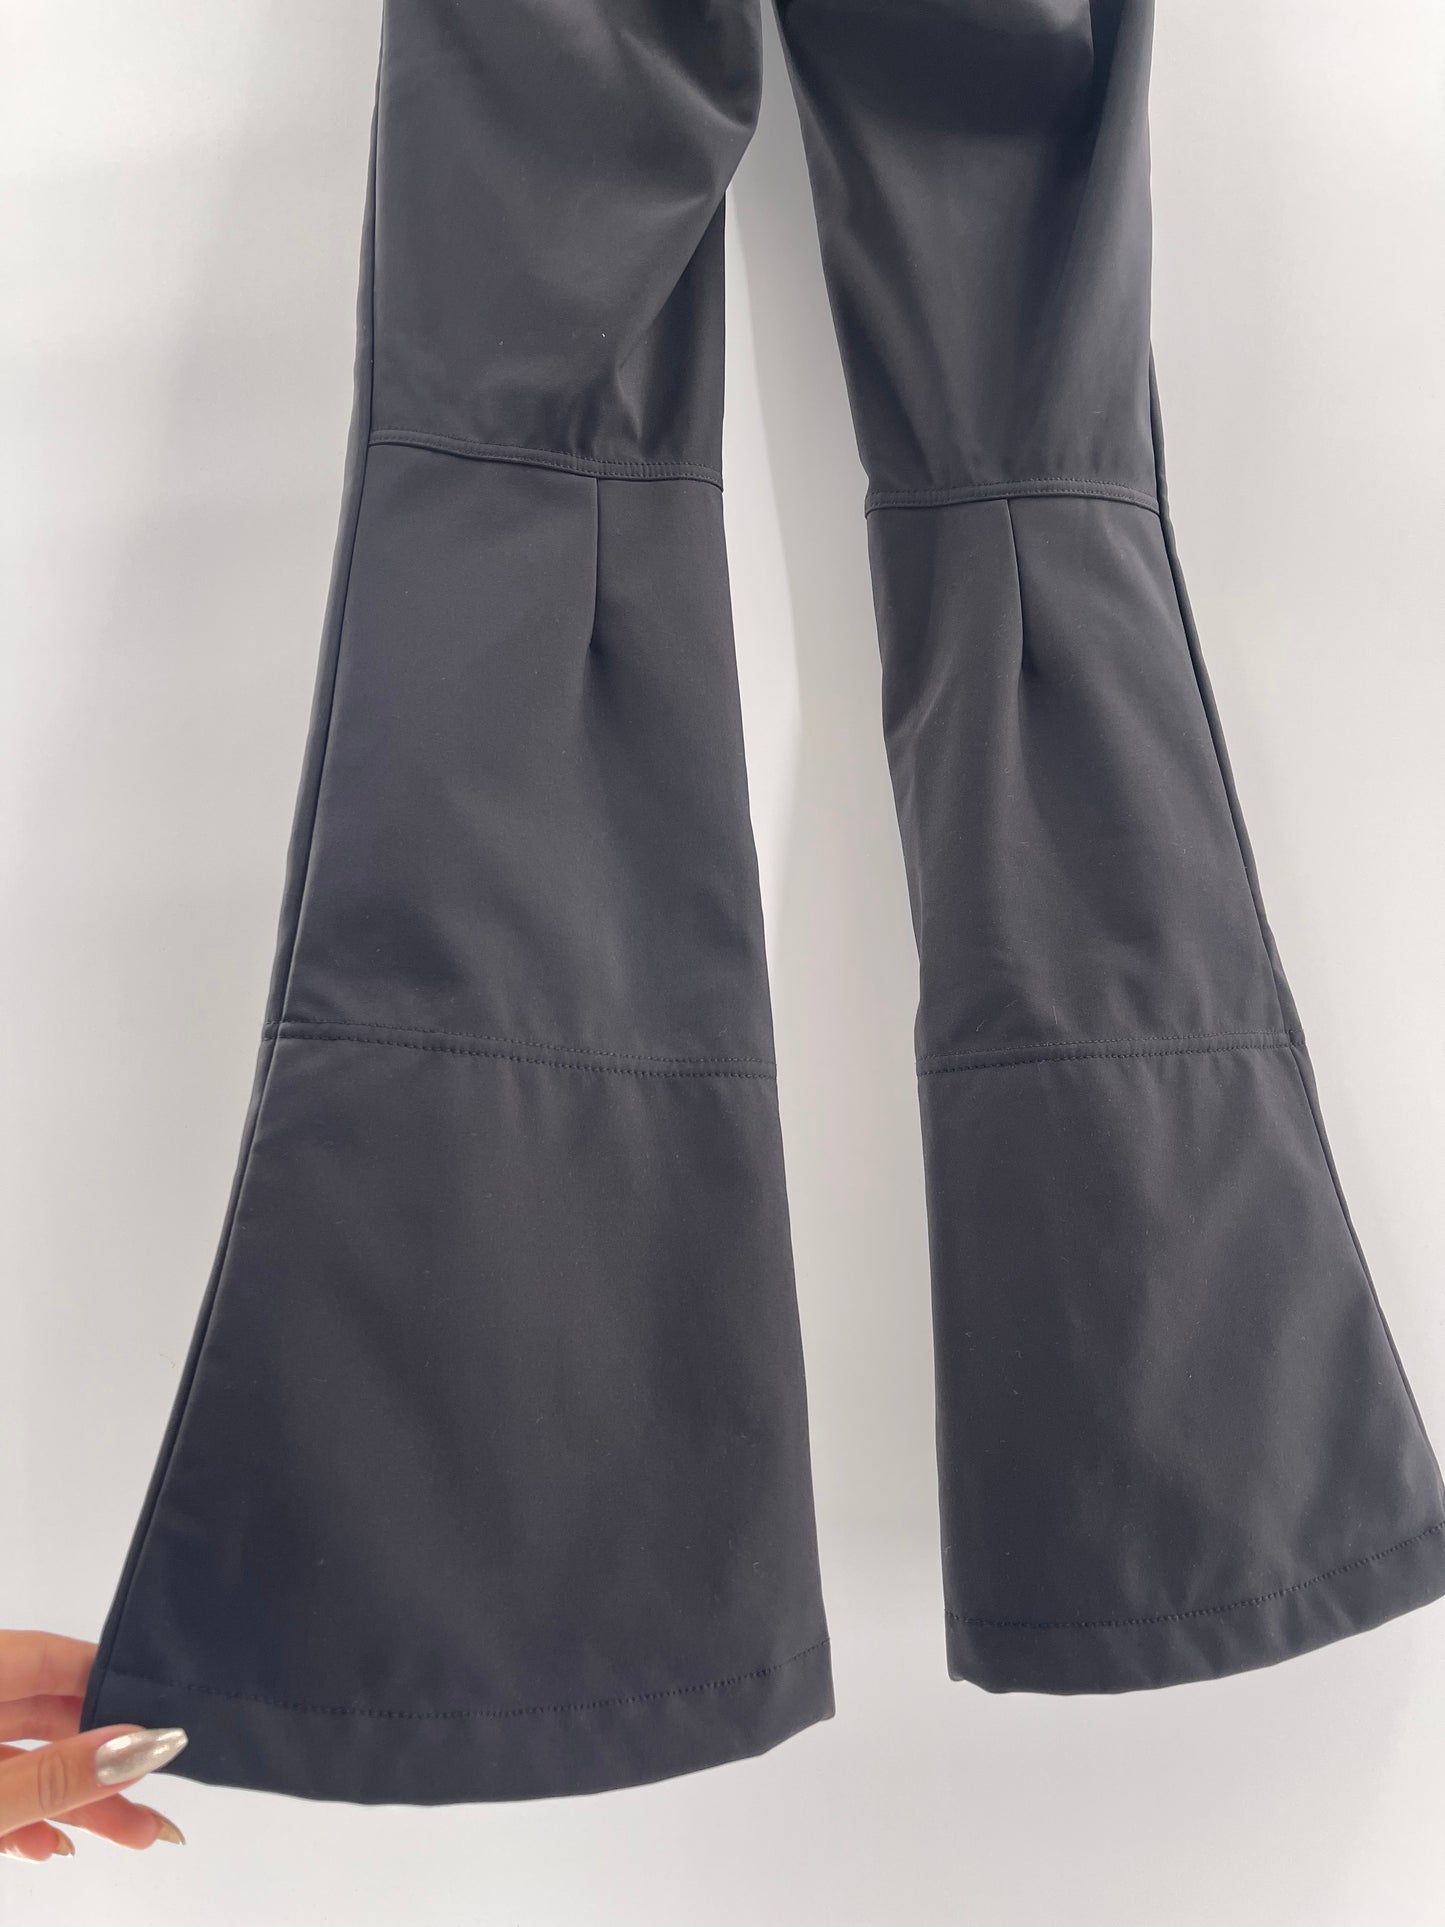 North Face Flared Pants (Sz XS)